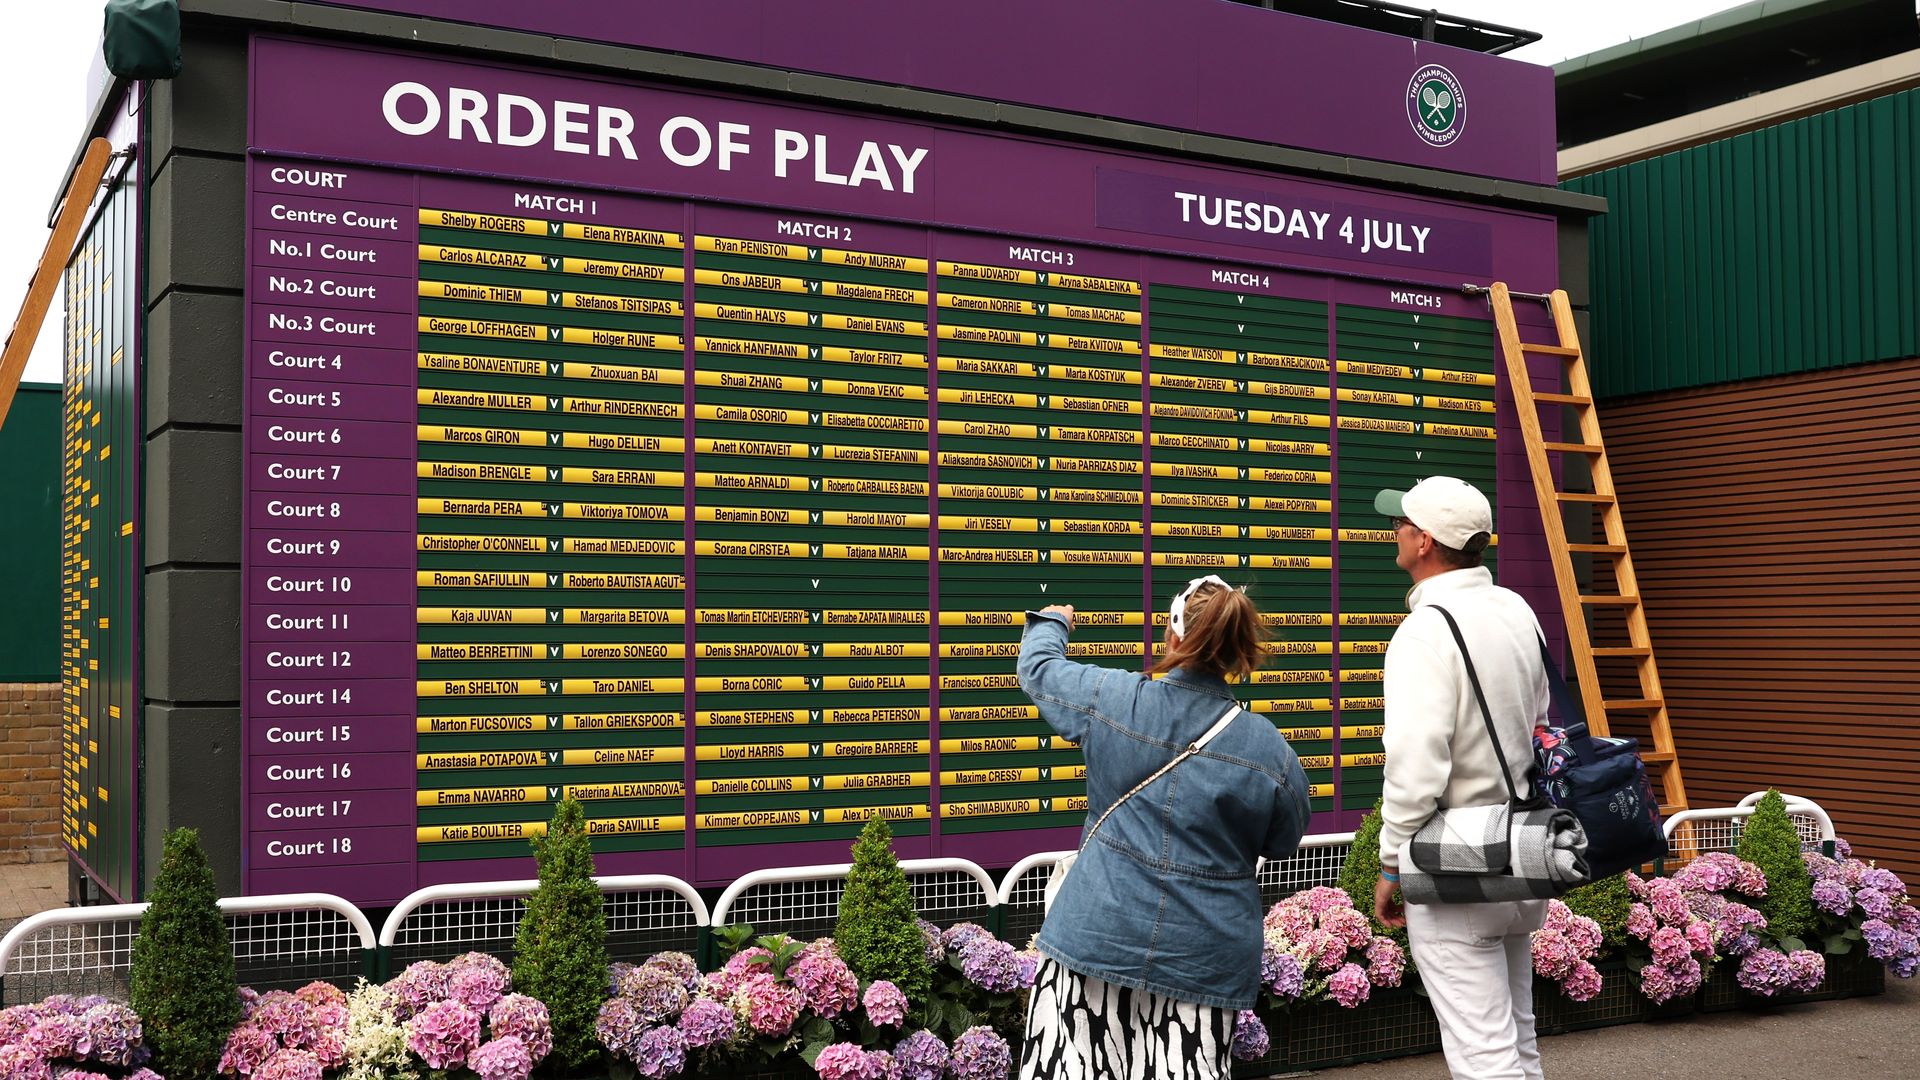 A board showing the games taking place at Wimbledon, two people stand looking at it